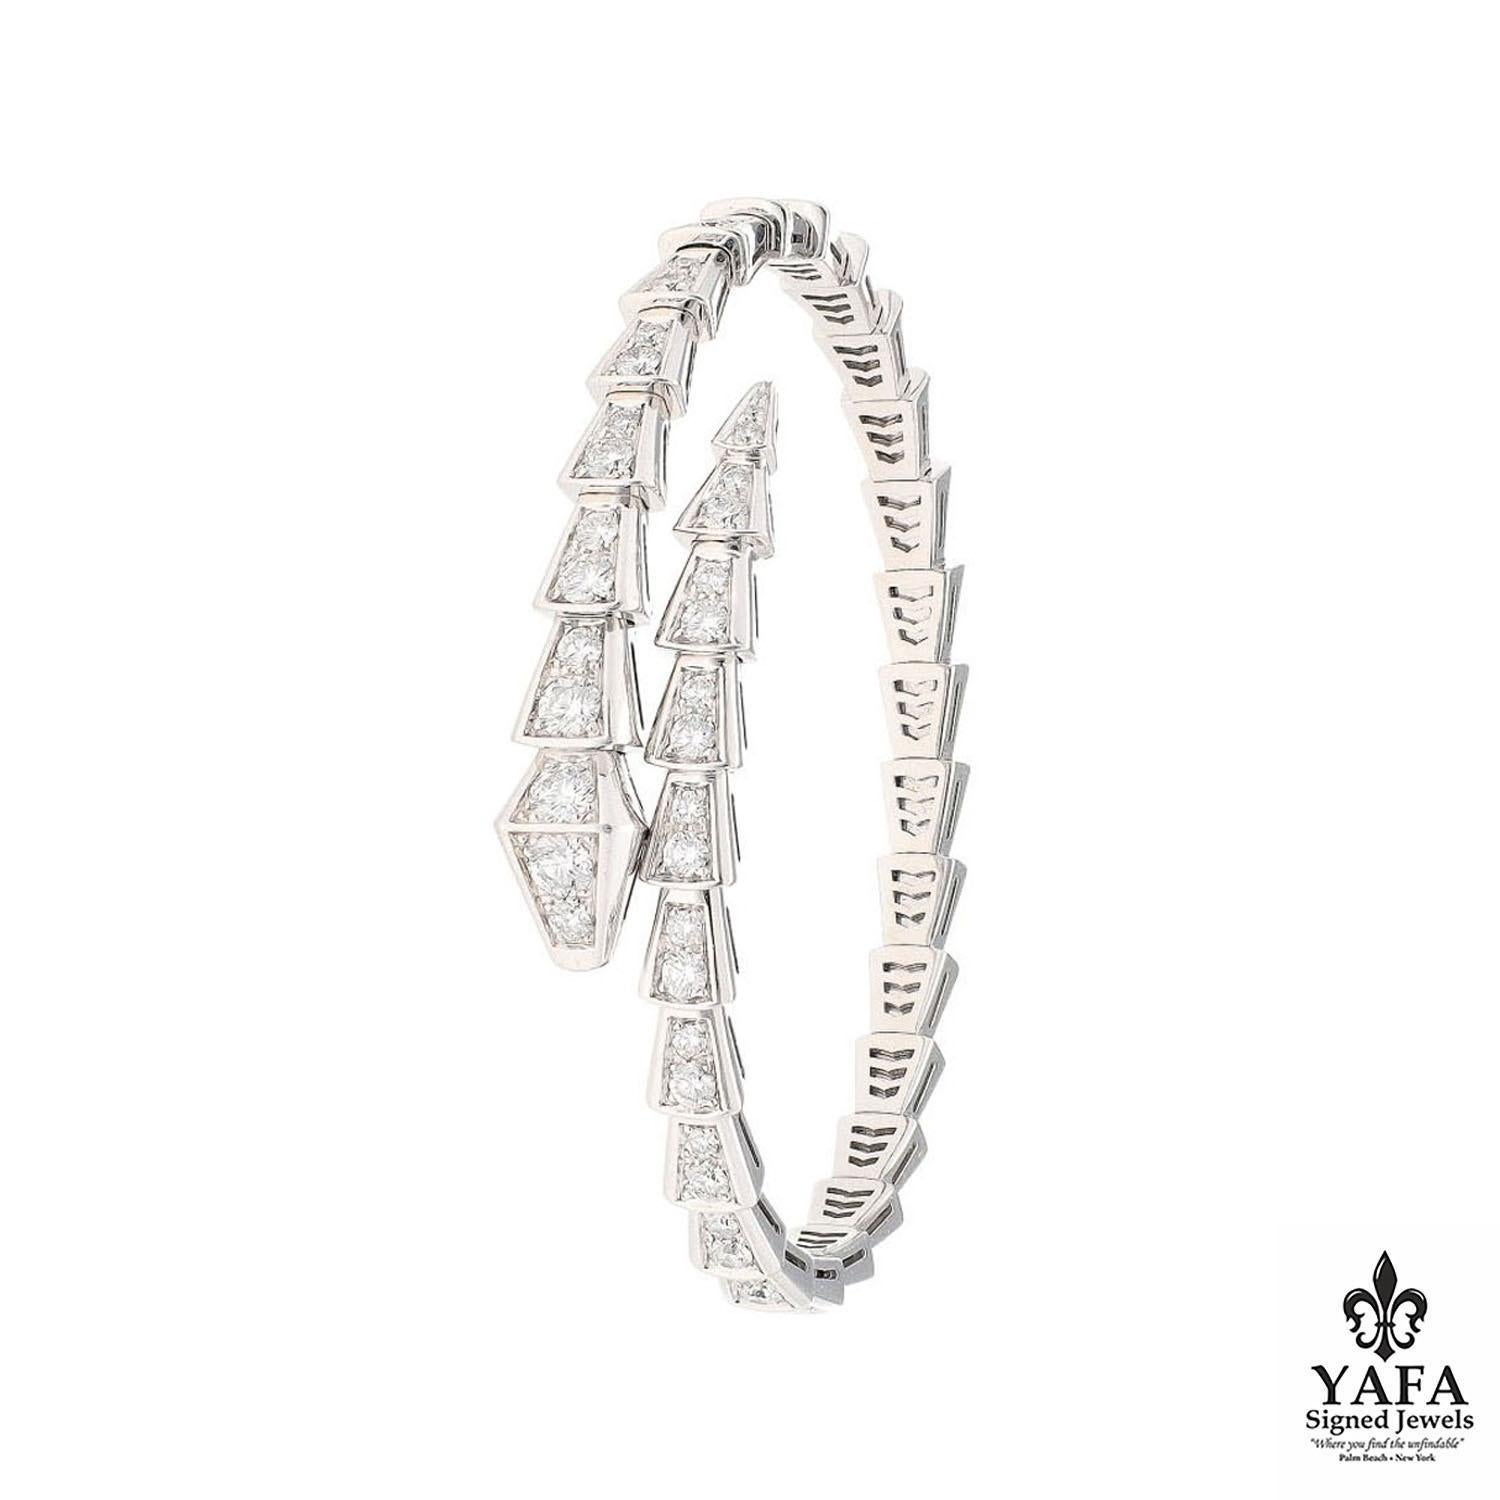 Part of Bvlgari's iconic Serpenti collection representing wisdom, vitality, and seduction. The Bvlgari Serpenti Viper one-coil slim bracelet in 18k white gold, set with pave diamonds. 
Size: Medium
Signed Bulgari

Vintage and Estate Collection